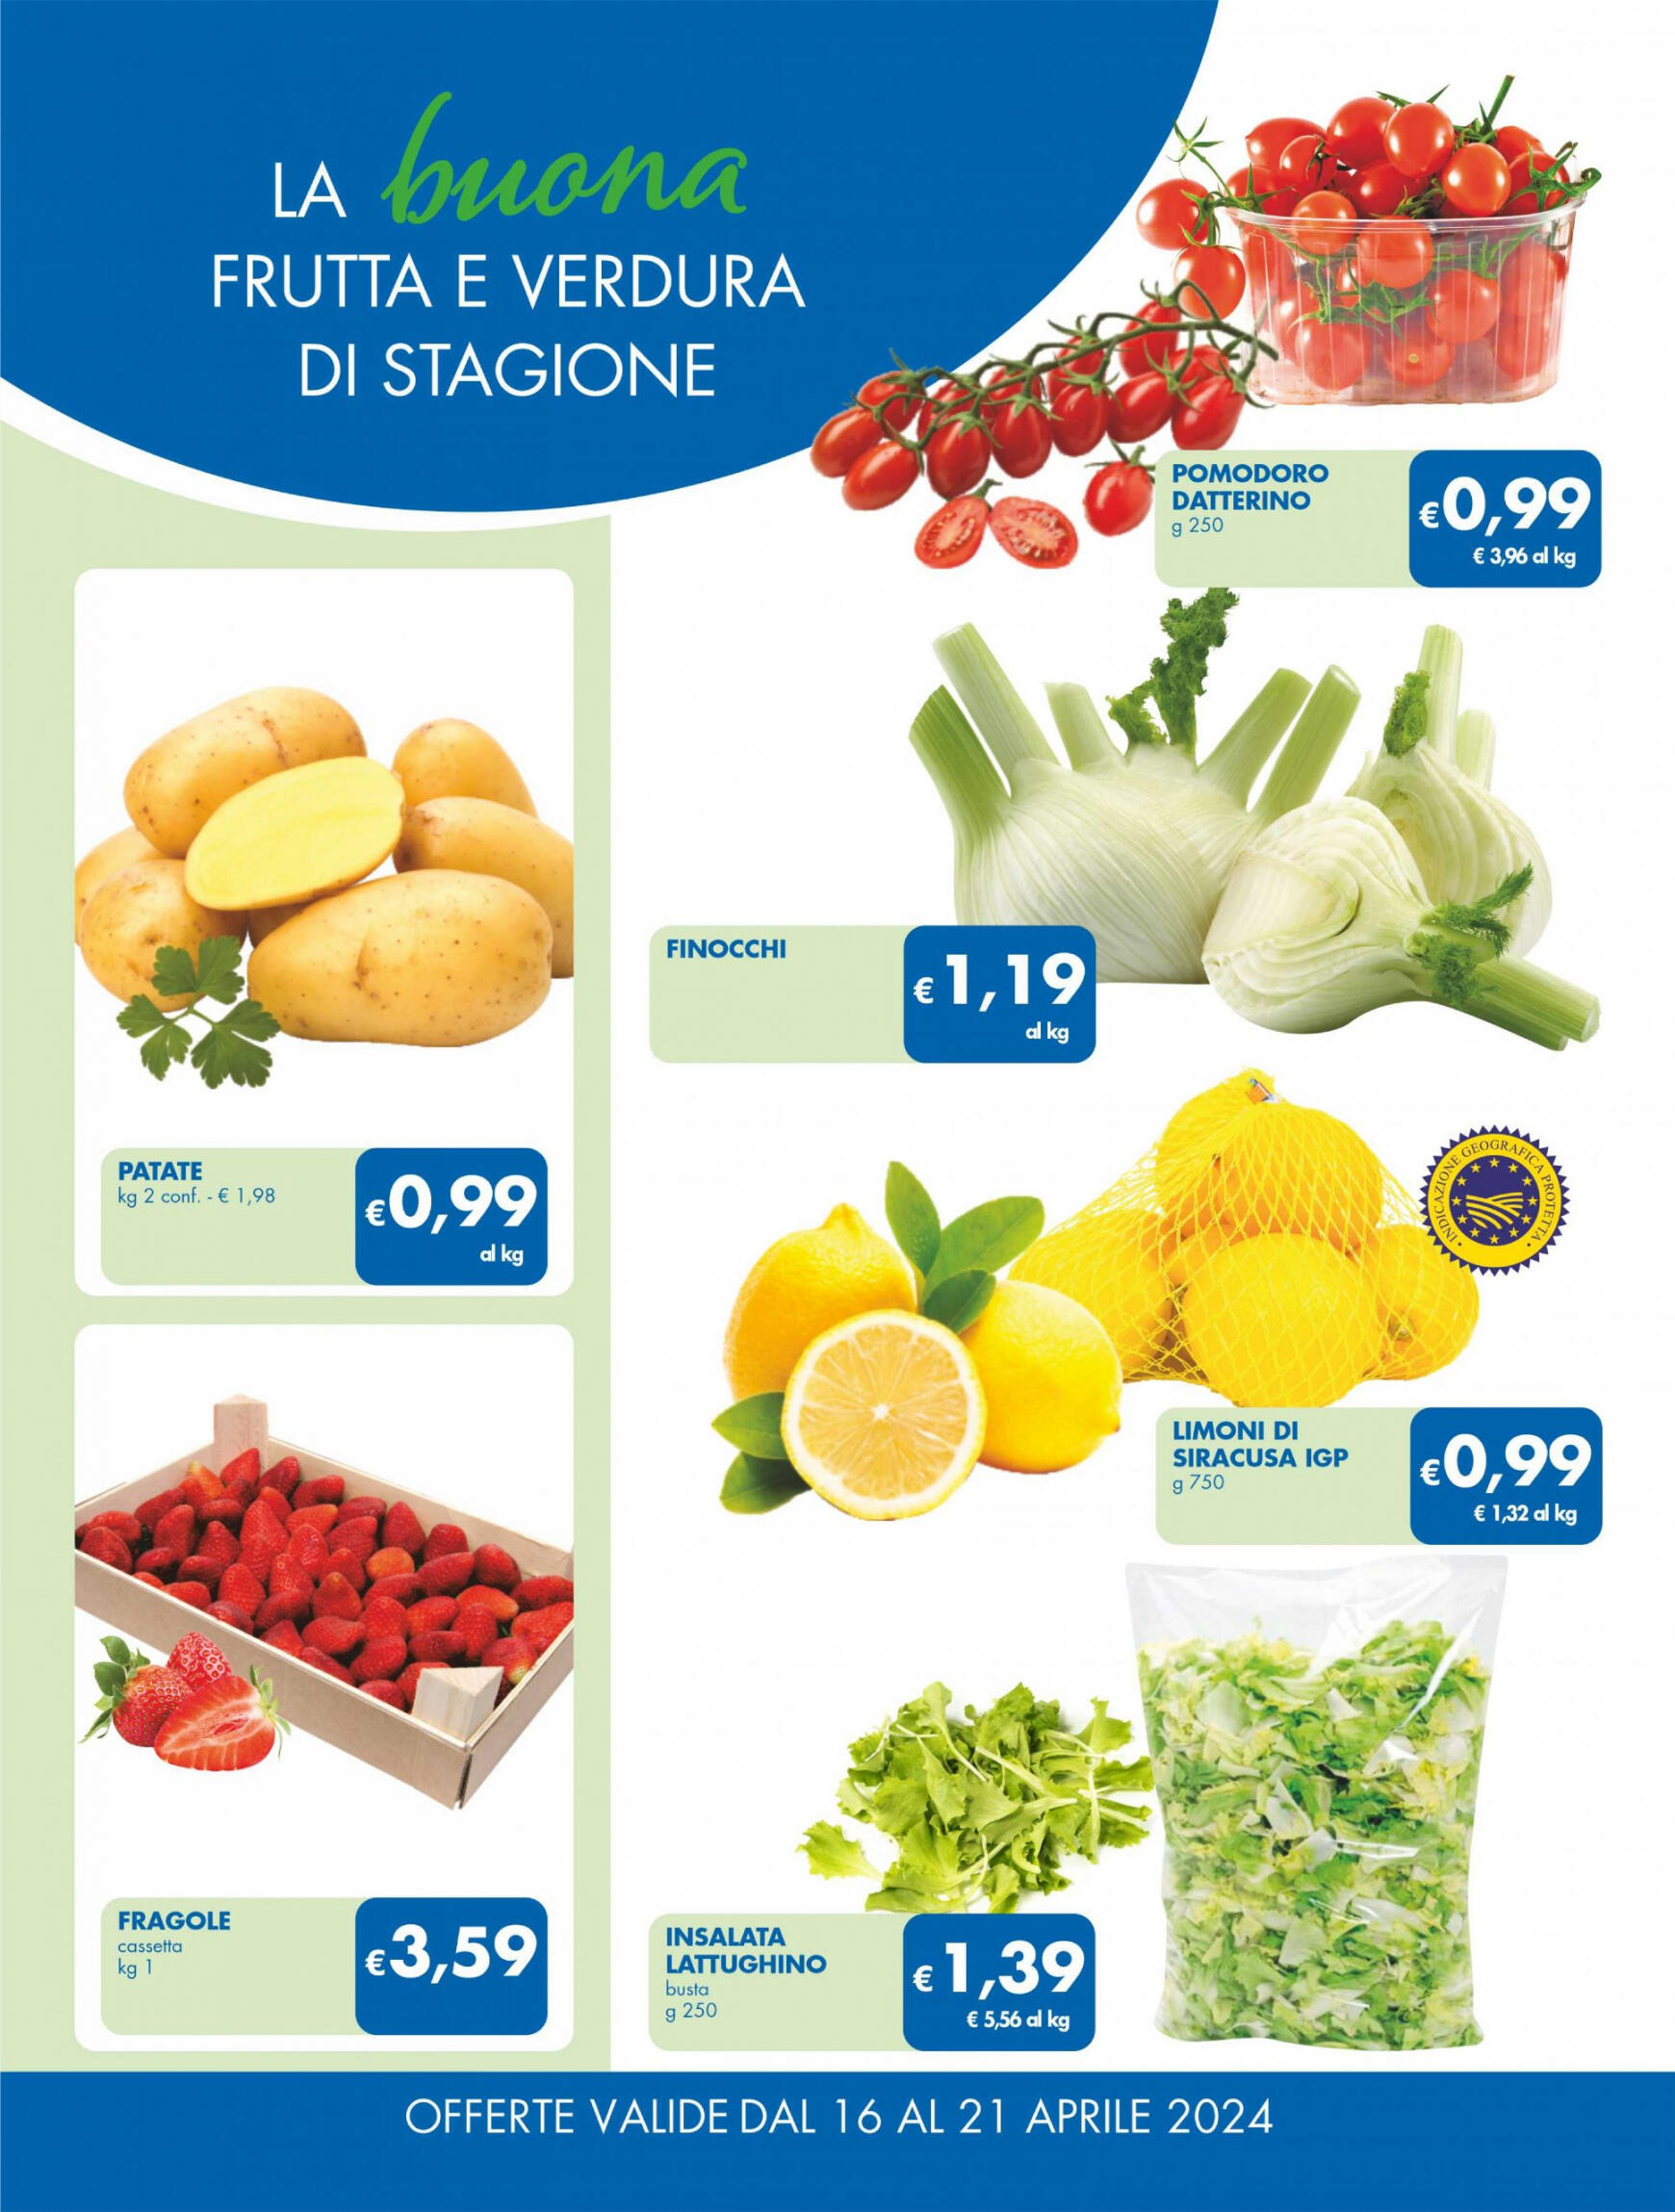 md-discount - Nuovo volantino MD 16.04. - 21.04. - page: 9